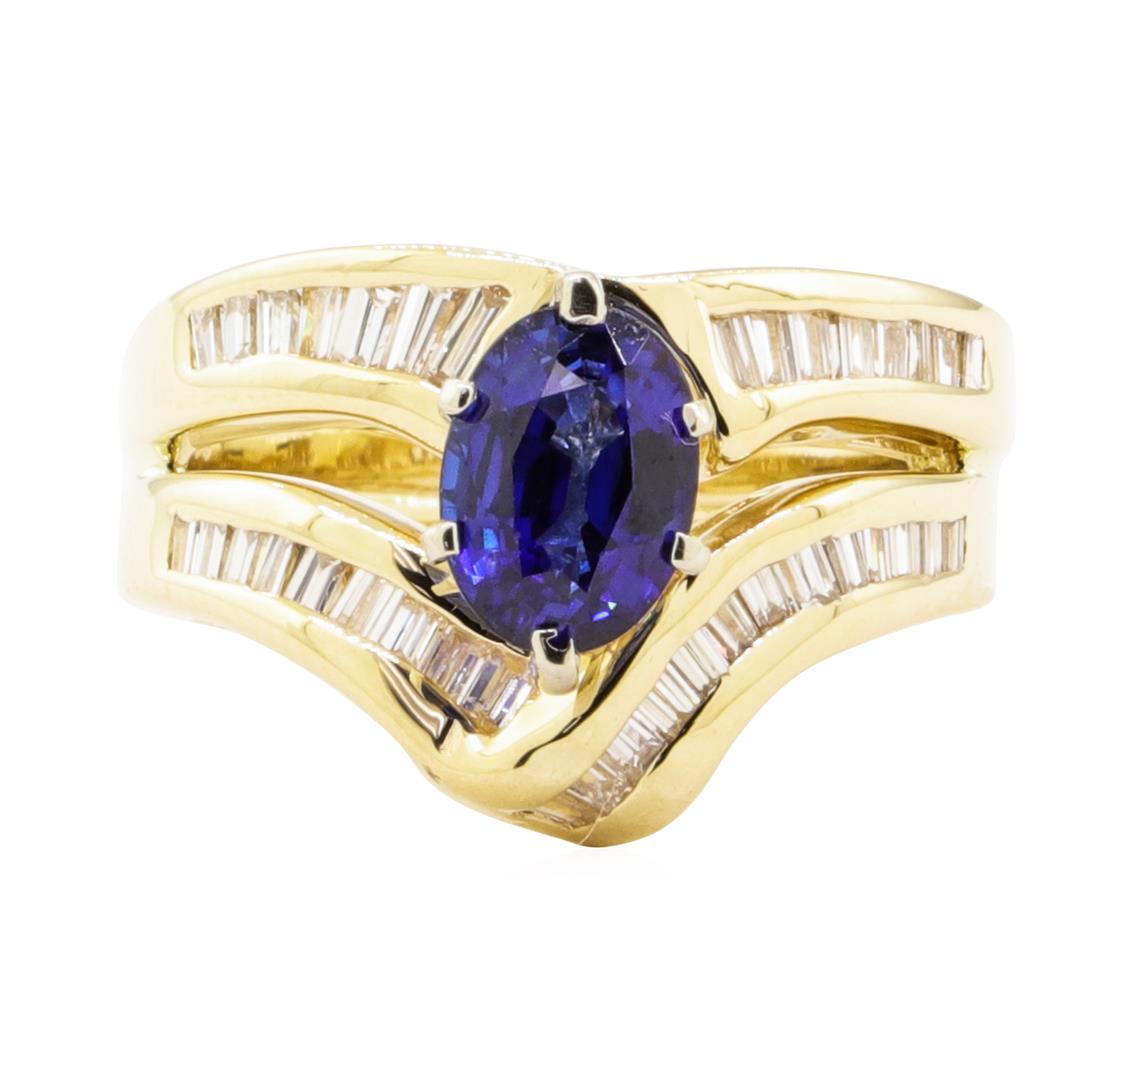 2.28 ctw Blue Sapphire And Diamond Ring And Attached Band - 14KT Yellow Gold